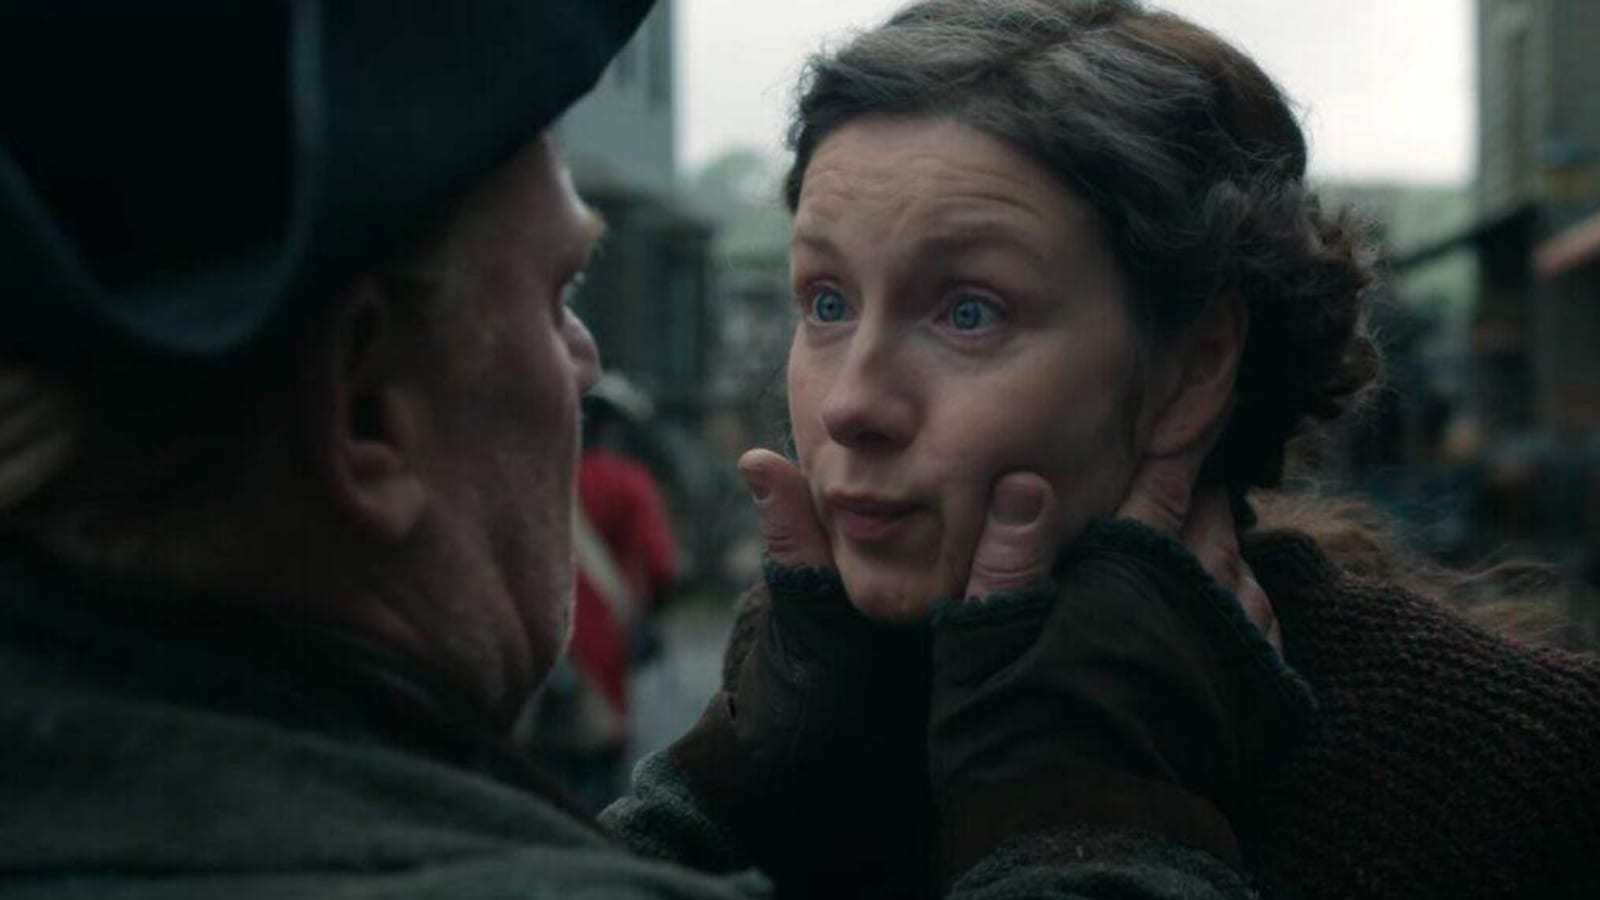 ‘Outlander’ Star Mark Lewis Jones on His Surprising Episode 4 Return & Moment With Claire